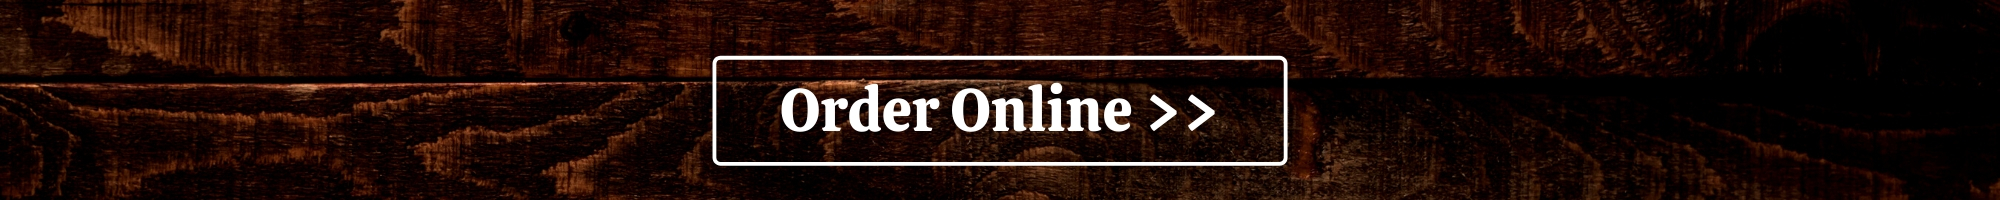 click here to order food online